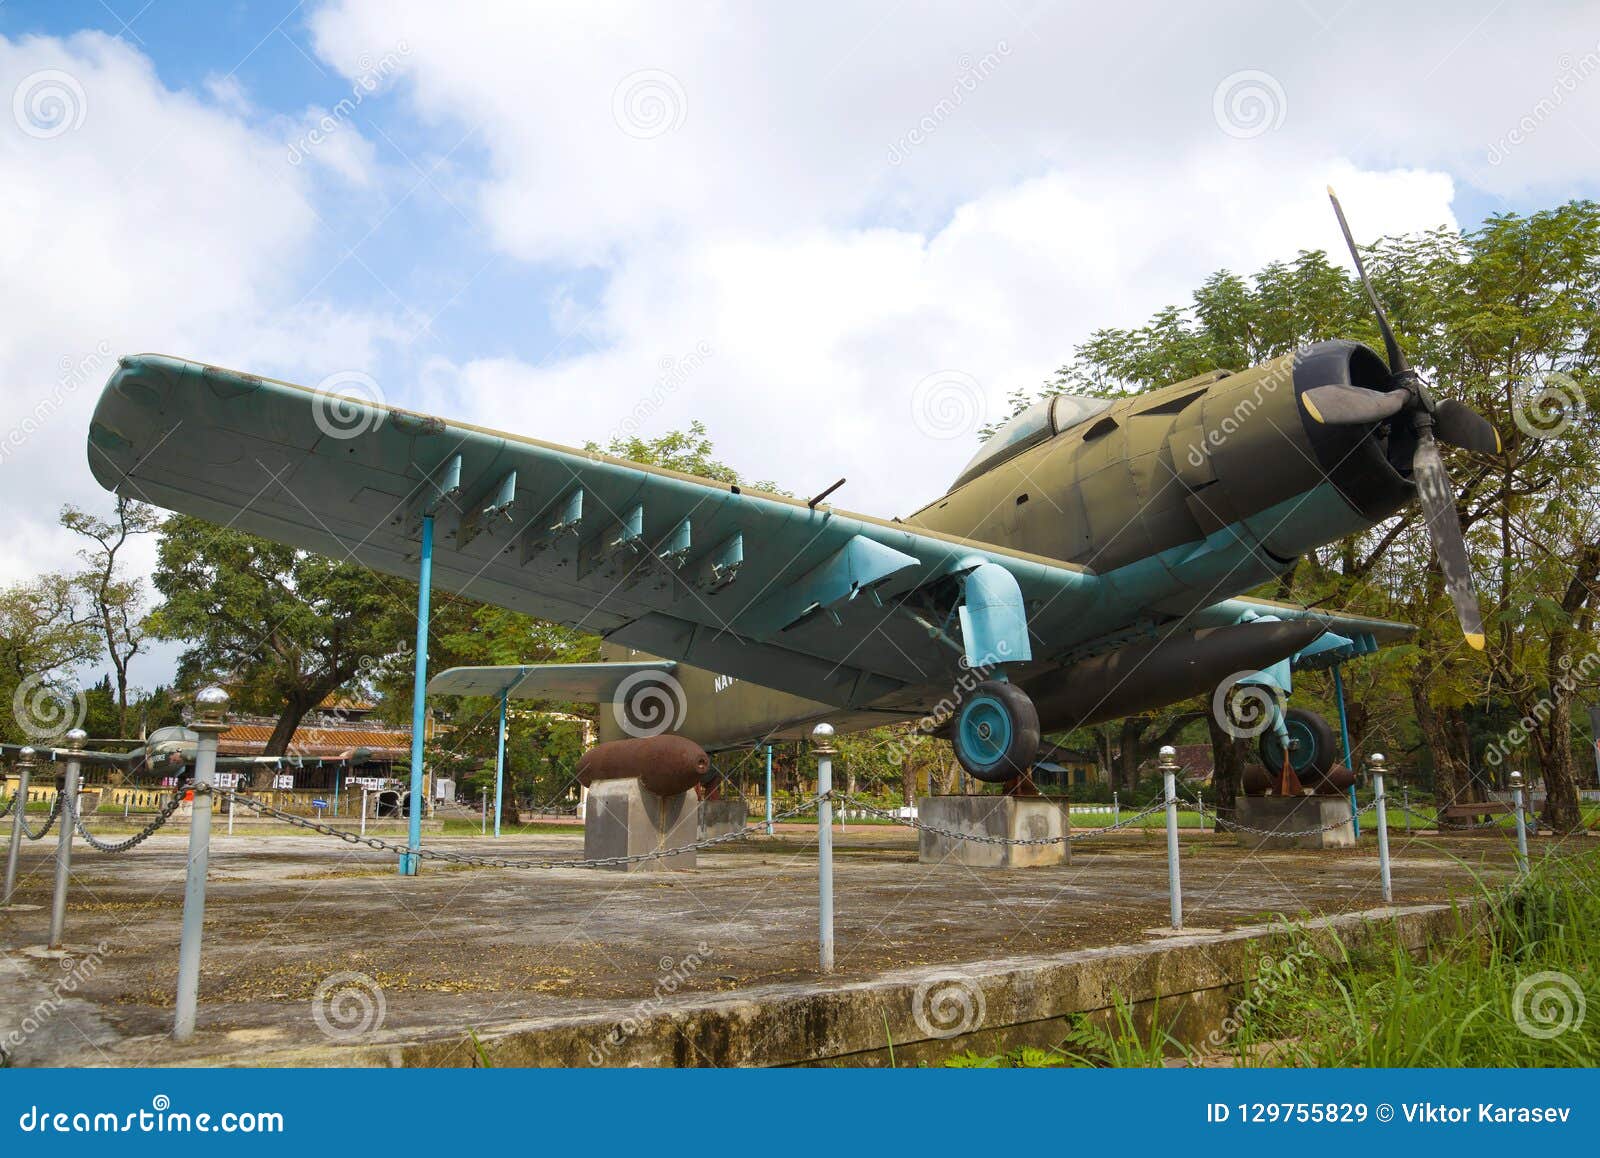 American Aircraft Ad-6 Douglas A-1 Skyraider In The Exposition Of Captured  Military Equipment In The City Museum Editorial Stock Image - Image Of  Skyraider, Attack: 129755829